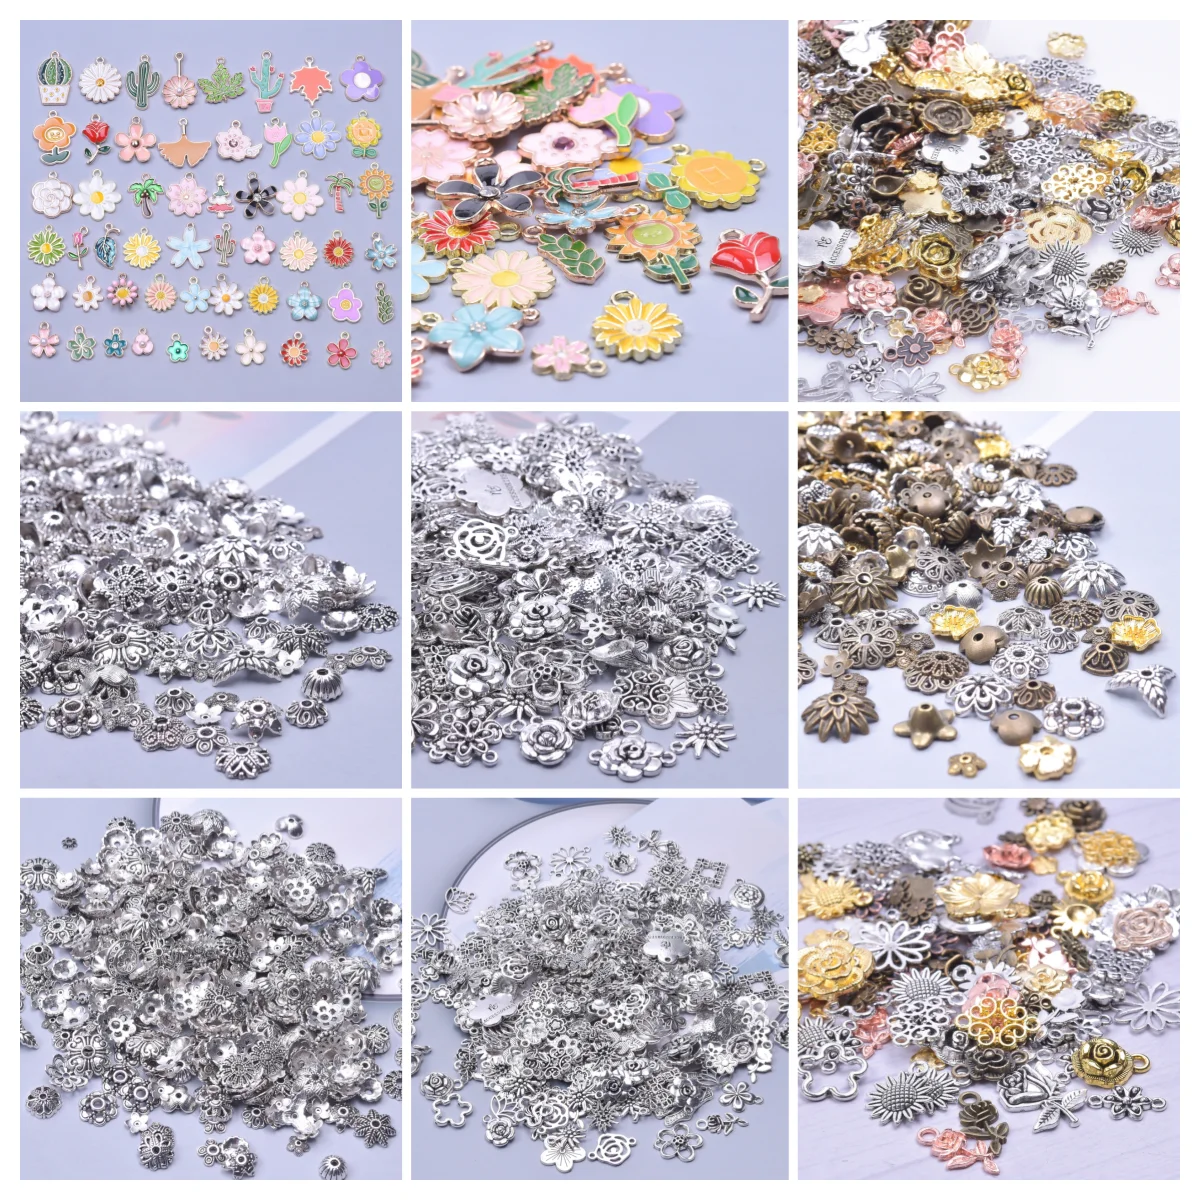 

30PCS Random Mixed Charms 200+ Styles Plant Flower Charms Daisy Sunflower Rose Pendant Flower Bead Caps for Jewelry Making DIY